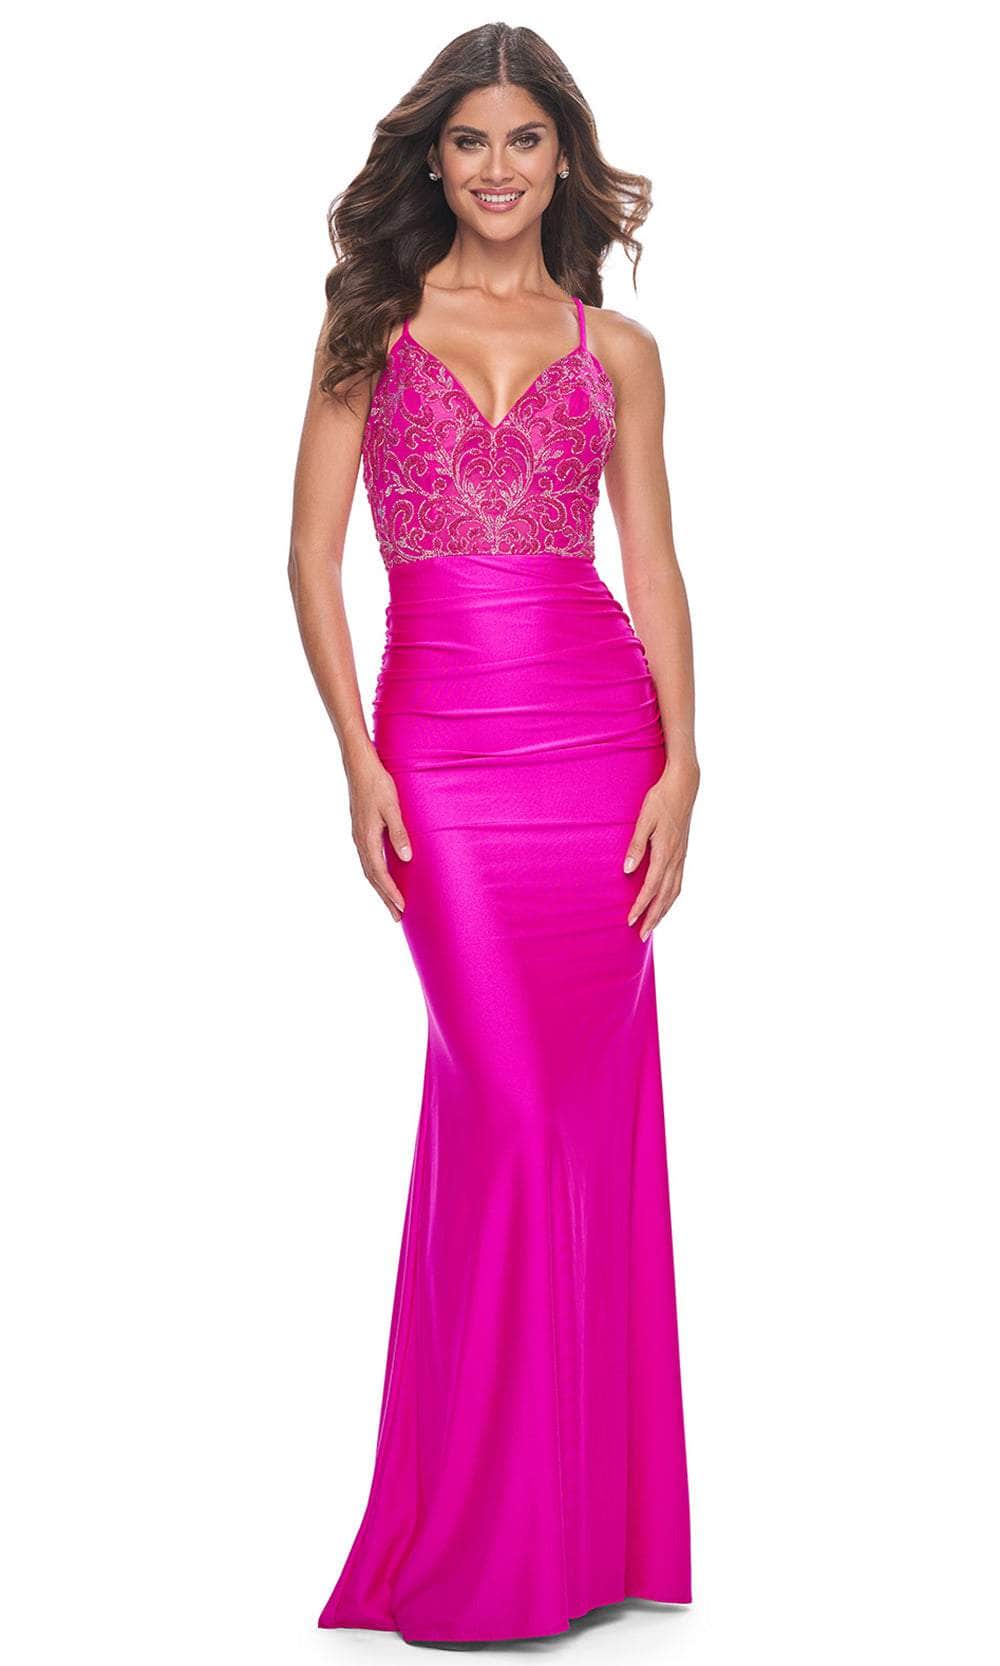 La Femme 32324 - Open Back Fitted Bodice Prom Gown Evening Dresses 00 /  Hot Fuchsia